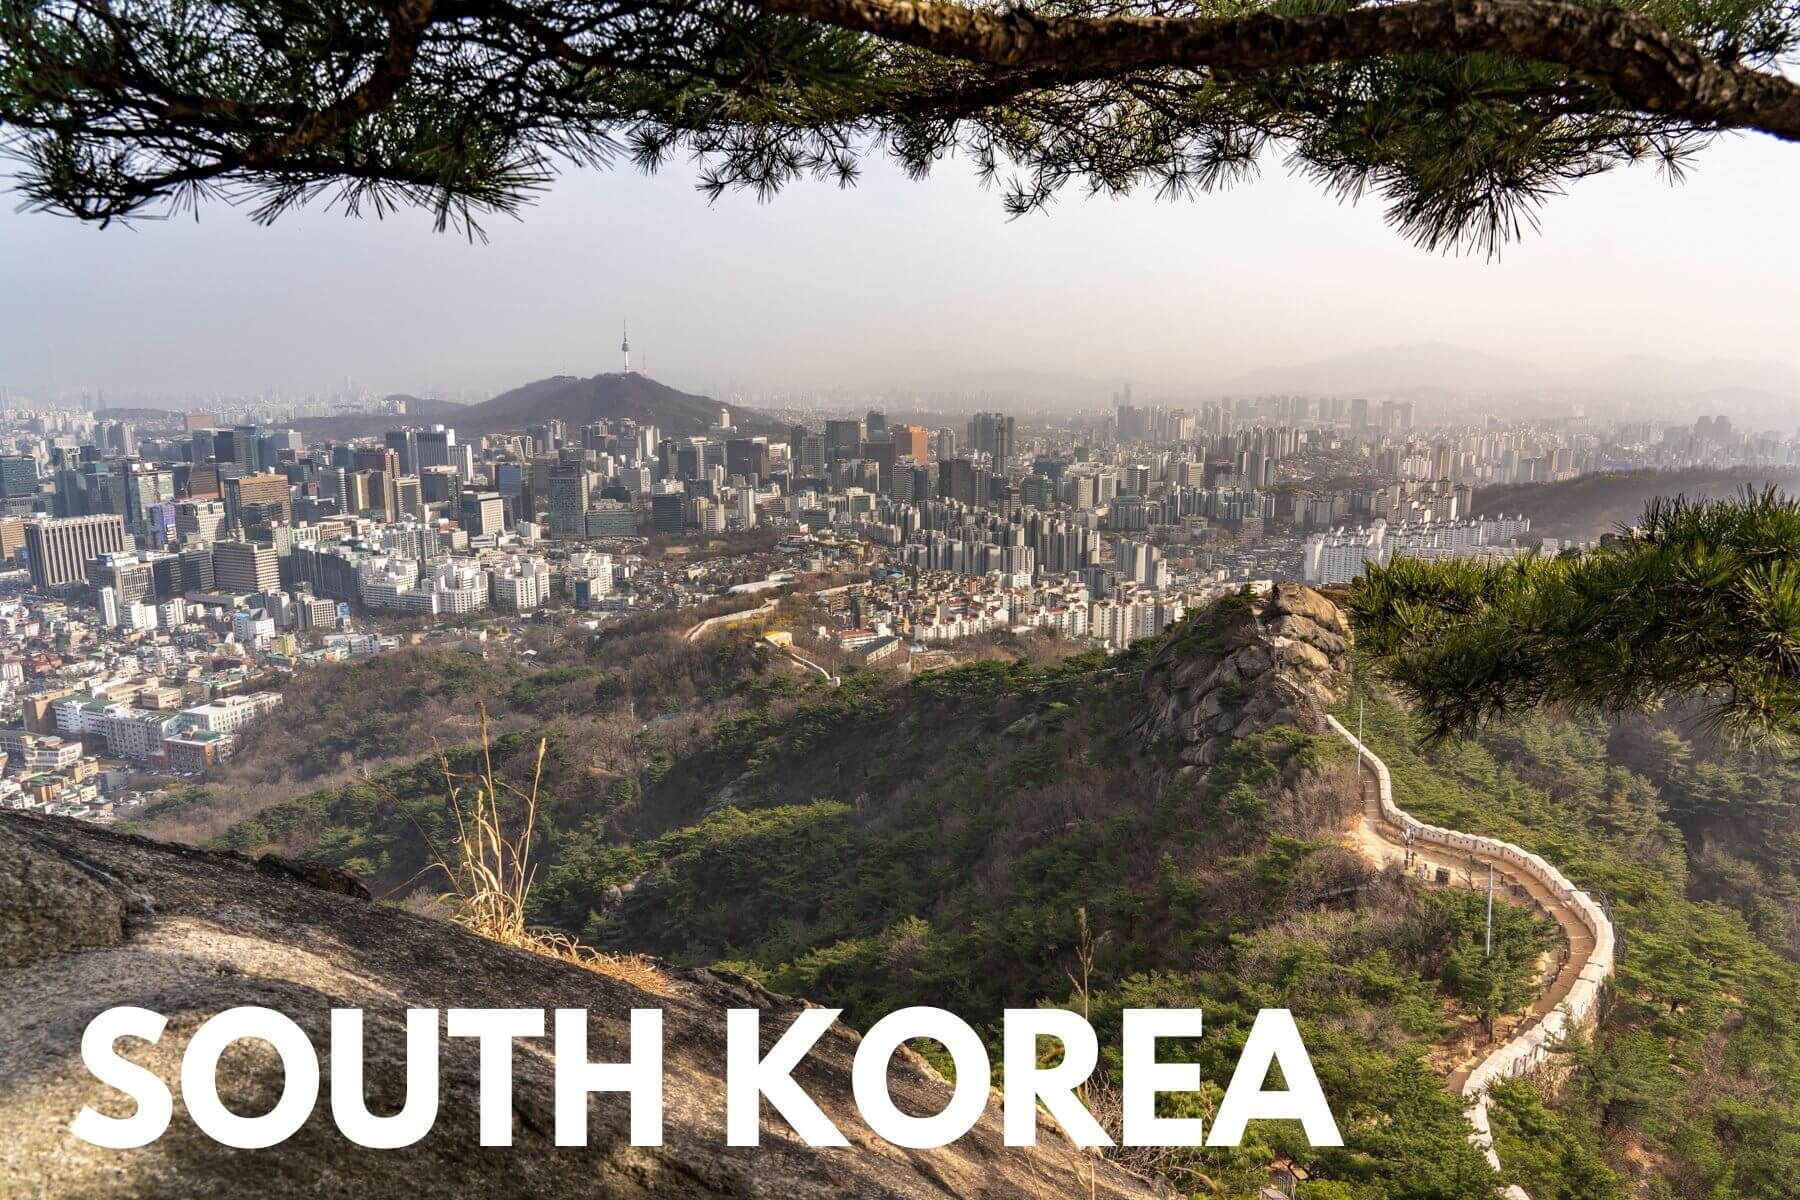 Photo of the city of Seoul South Korea behind hills with a stone wall and a tree branch, and the words South Korea overlaid